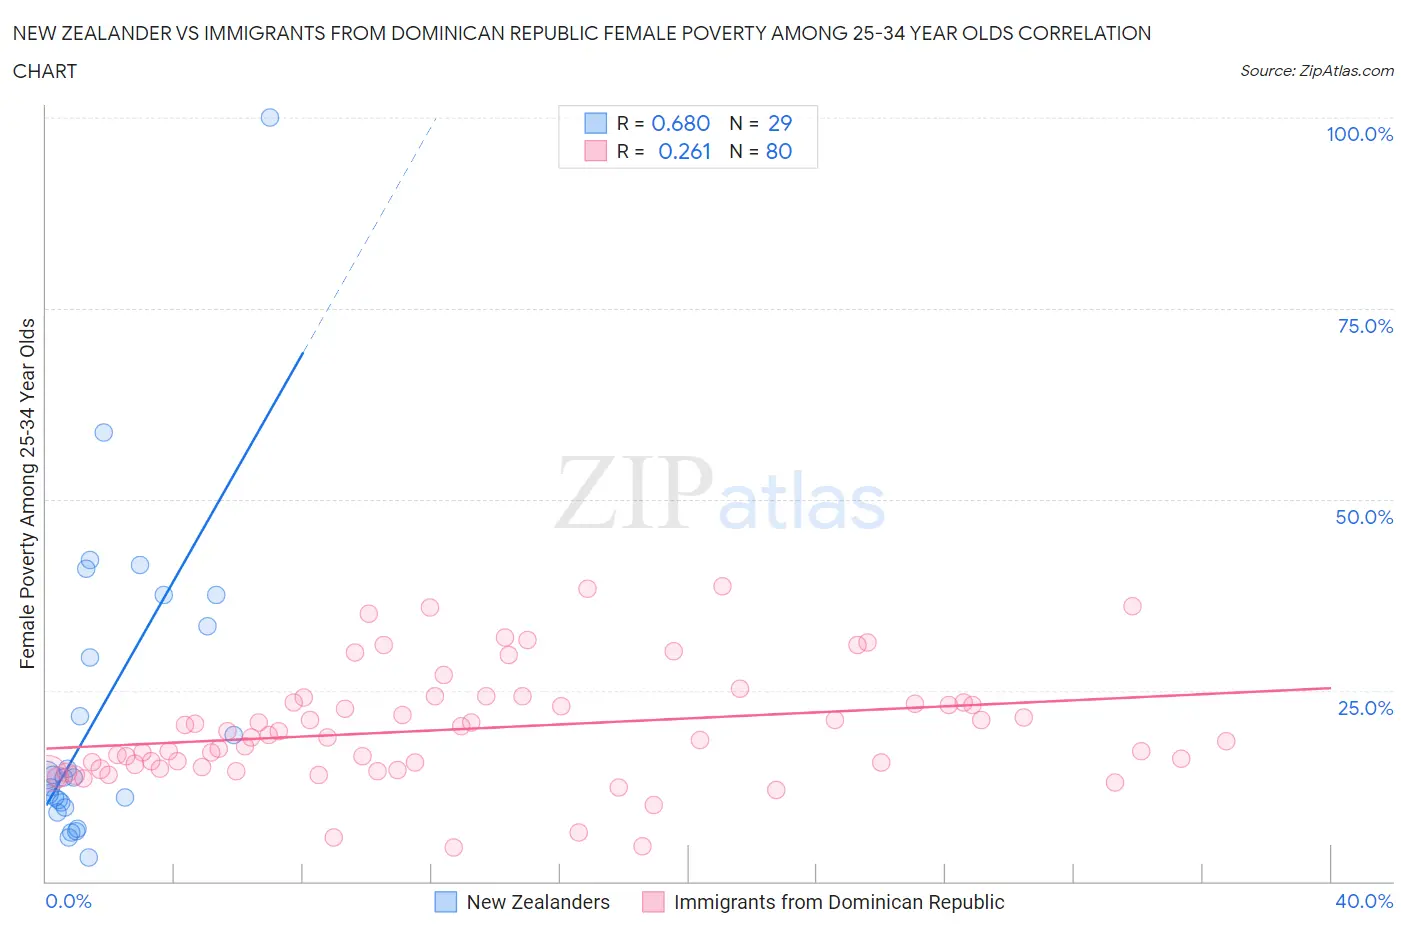 New Zealander vs Immigrants from Dominican Republic Female Poverty Among 25-34 Year Olds